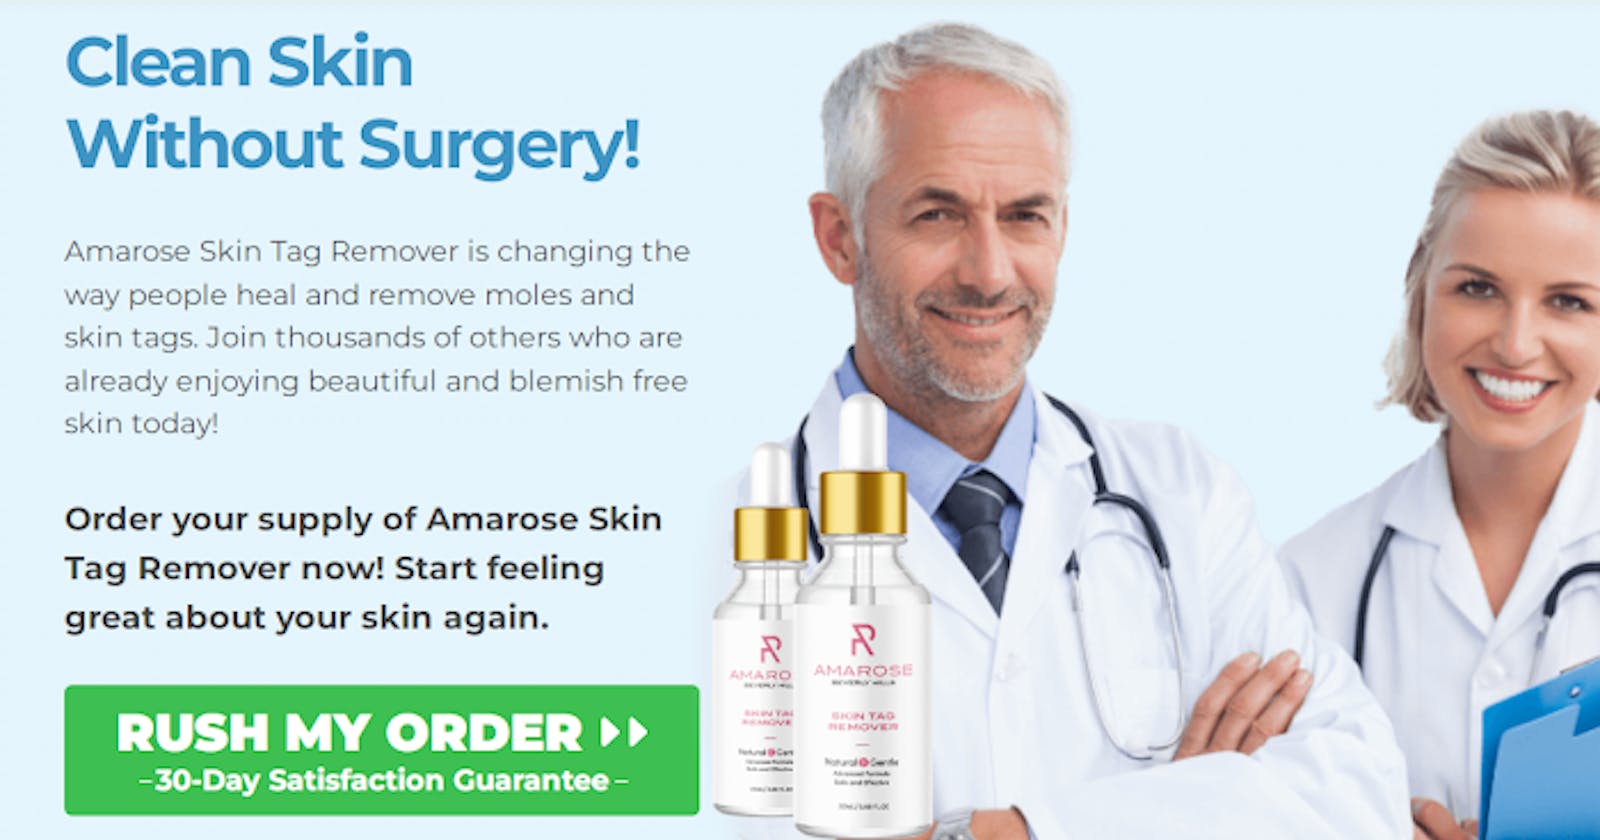 Skin Tags Safely and Effectively with Amarose Skin Tag Remover Canada